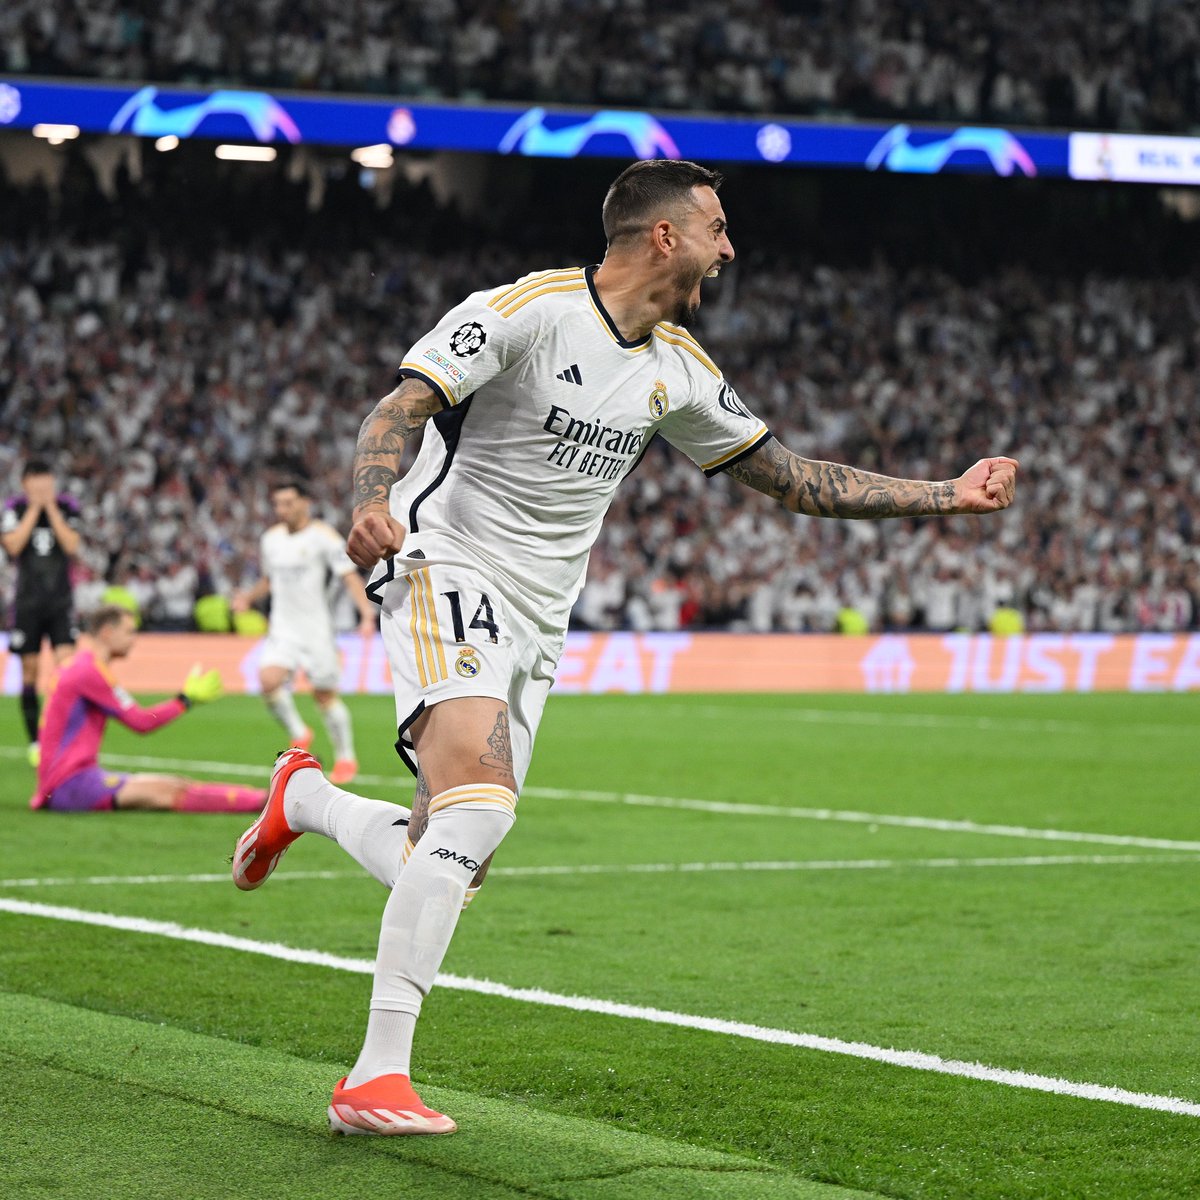 Absolute scenes in Madrid. Two late goals from Joselu have turned this #UCL semi-final around and the Bernabéu is rocking!